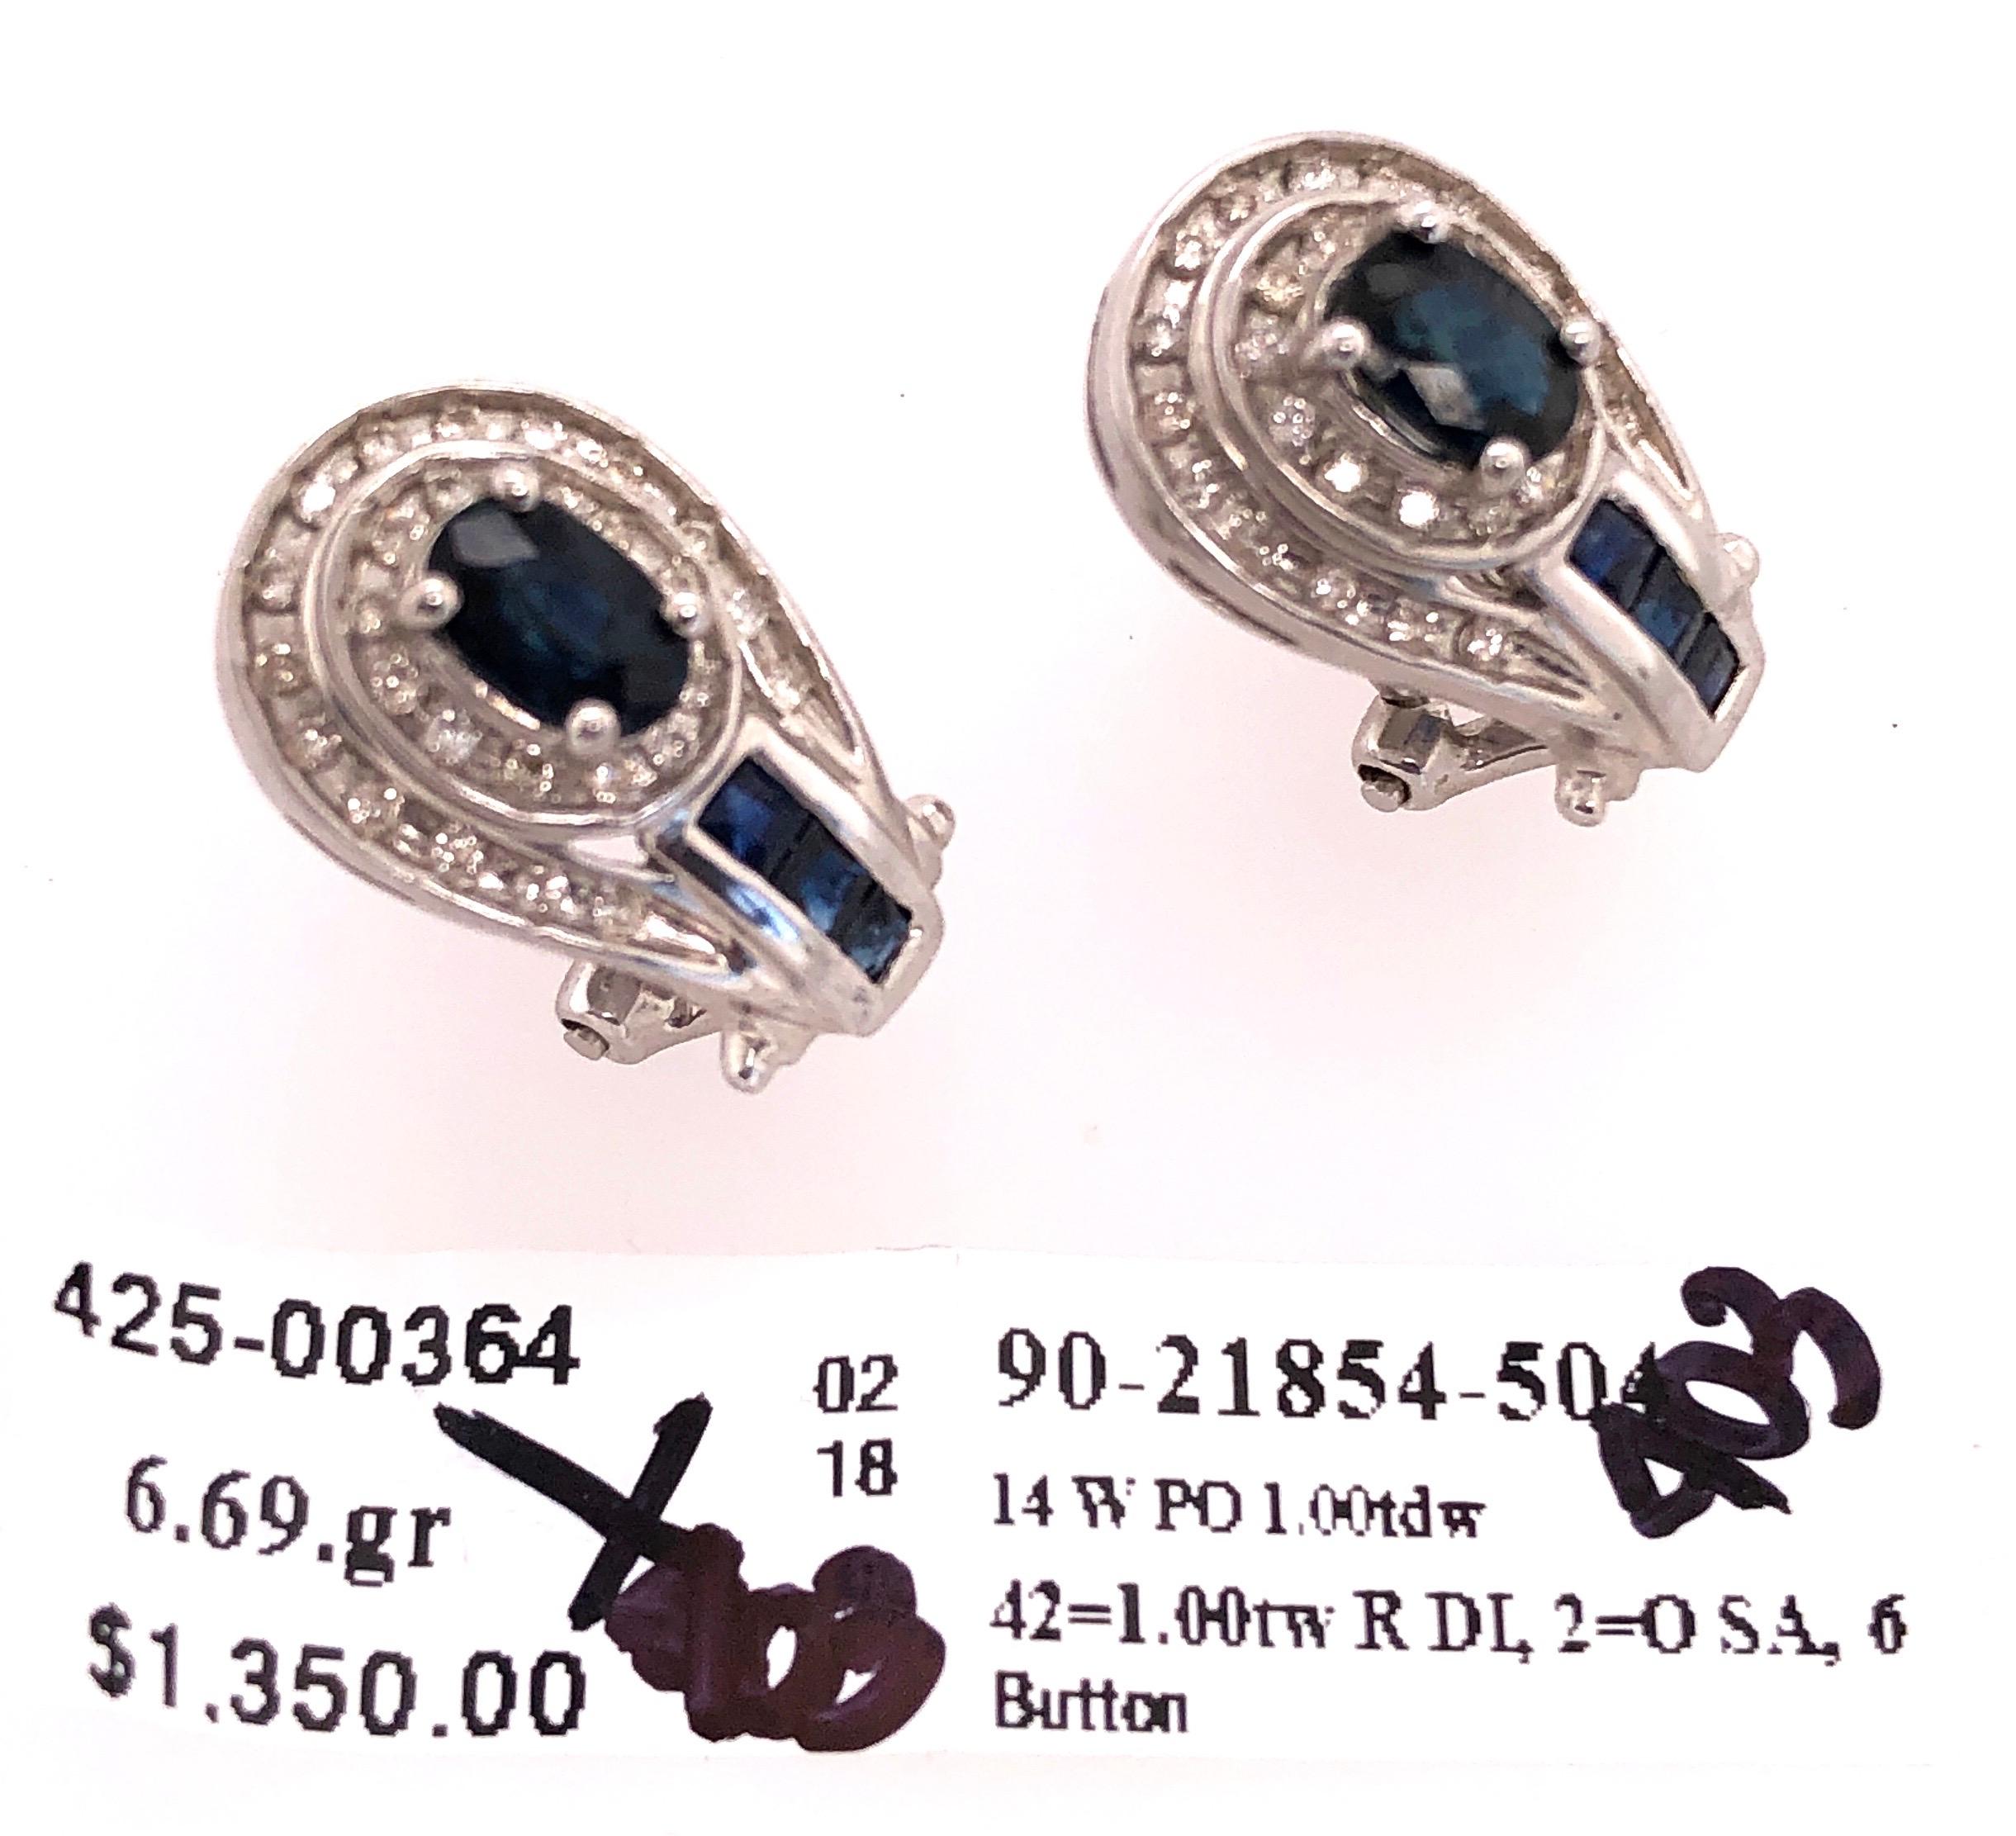 14 Karat Gold French Back Earrings with Diamonds and Blue Sapphires 1.0 TDW For Sale 4